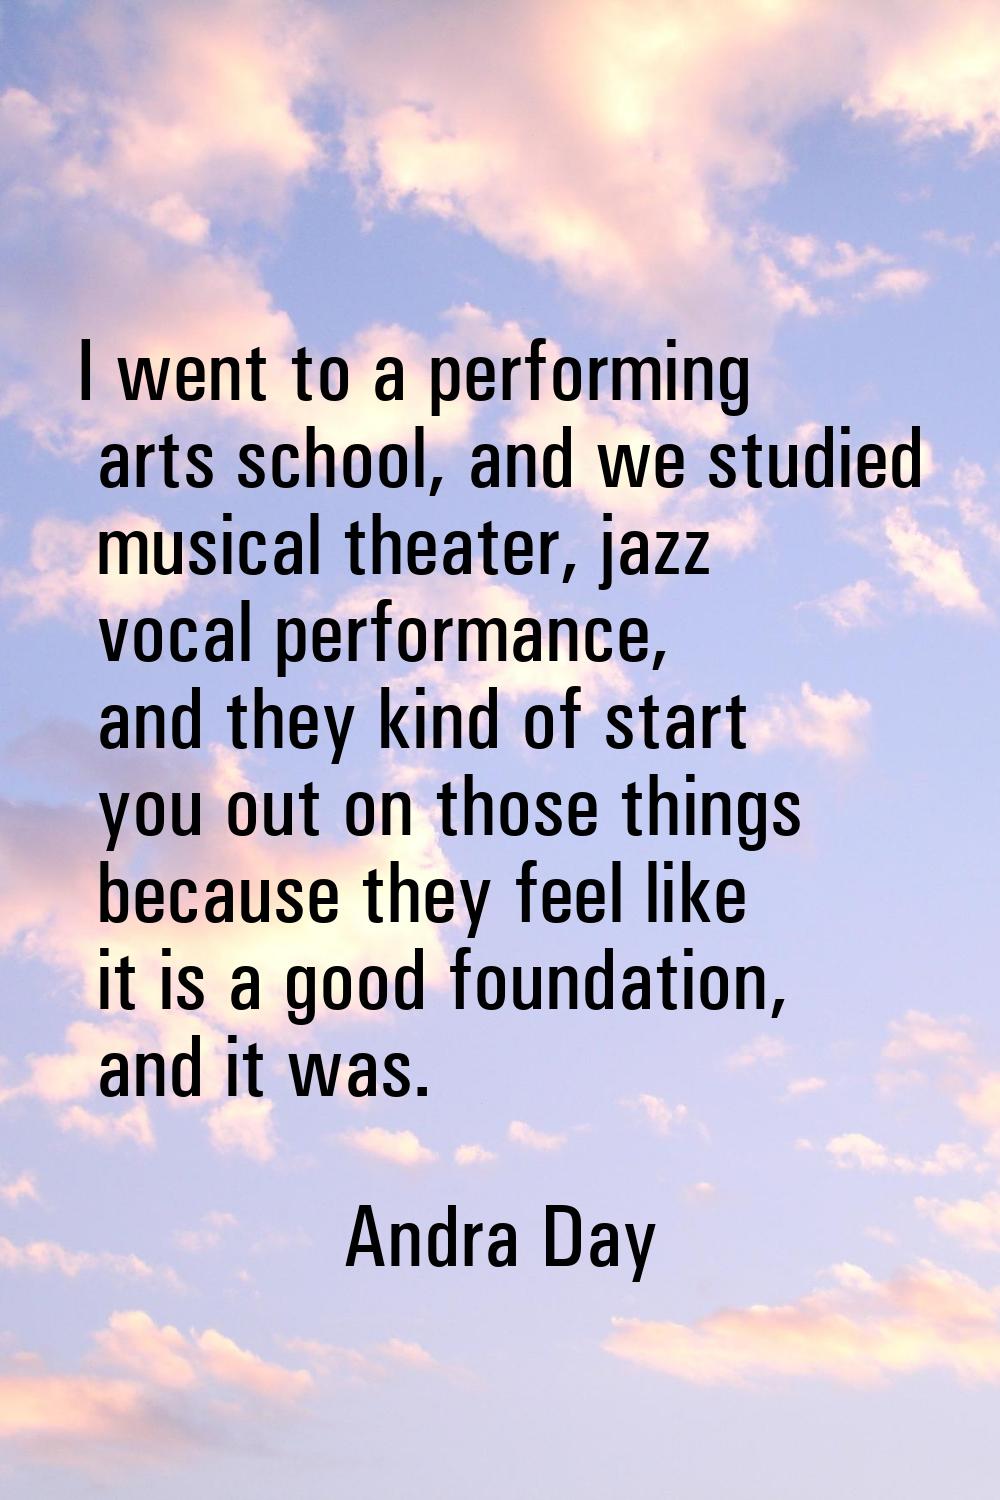 I went to a performing arts school, and we studied musical theater, jazz vocal performance, and the